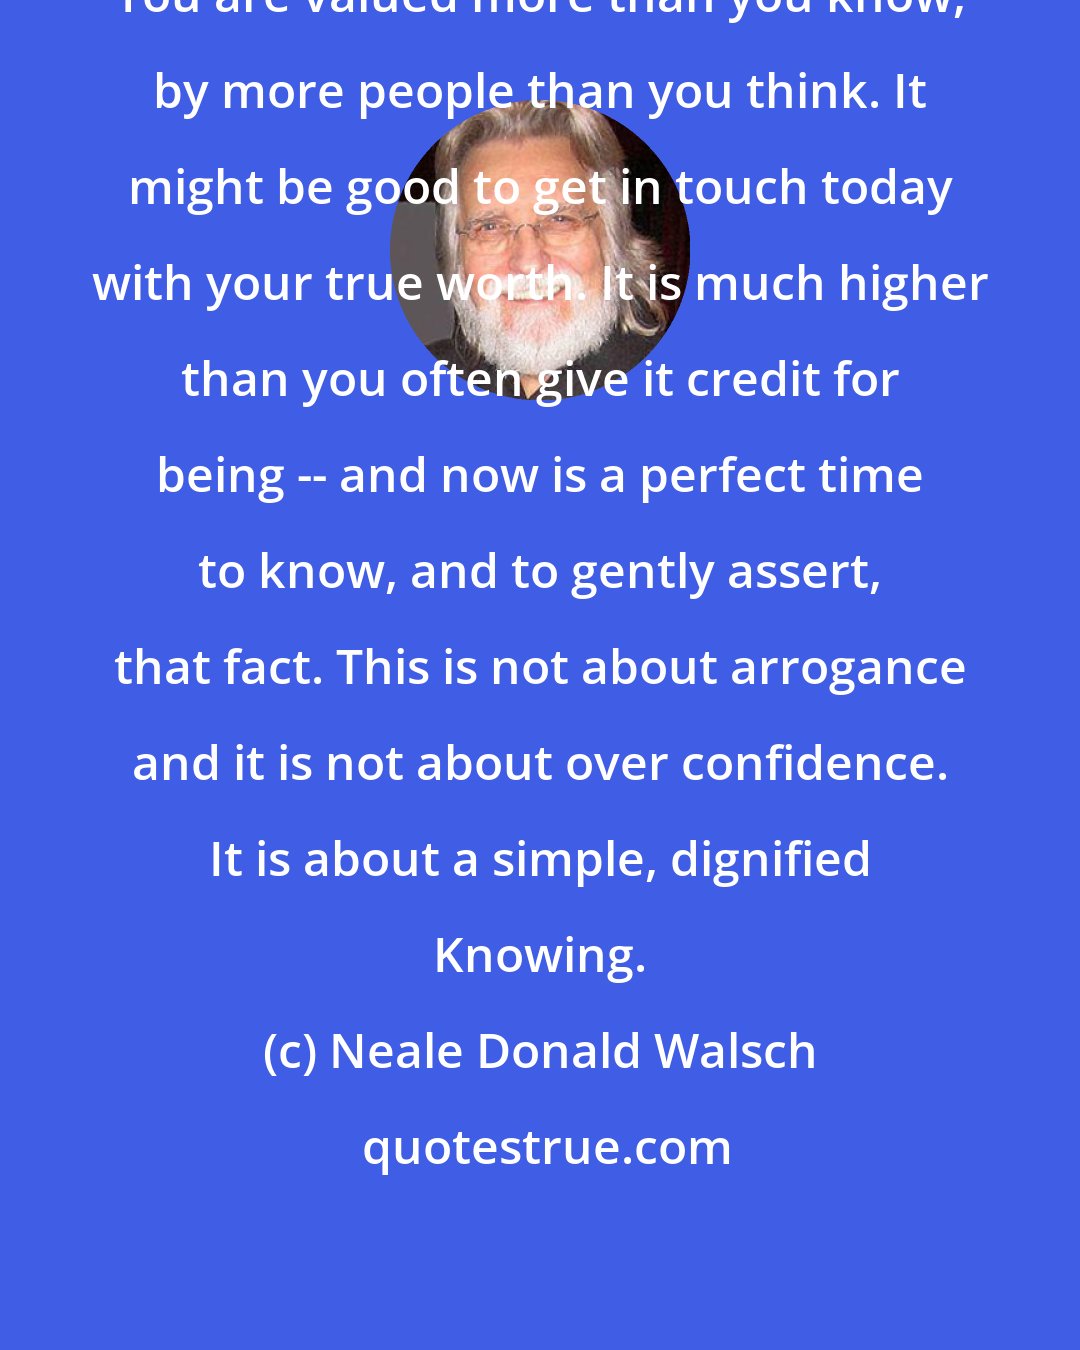 Neale Donald Walsch: You are valued more than you know, by more people than you think. It might be good to get in touch today with your true worth. It is much higher than you often give it credit for being -- and now is a perfect time to know, and to gently assert, that fact. This is not about arrogance and it is not about over confidence. It is about a simple, dignified Knowing.